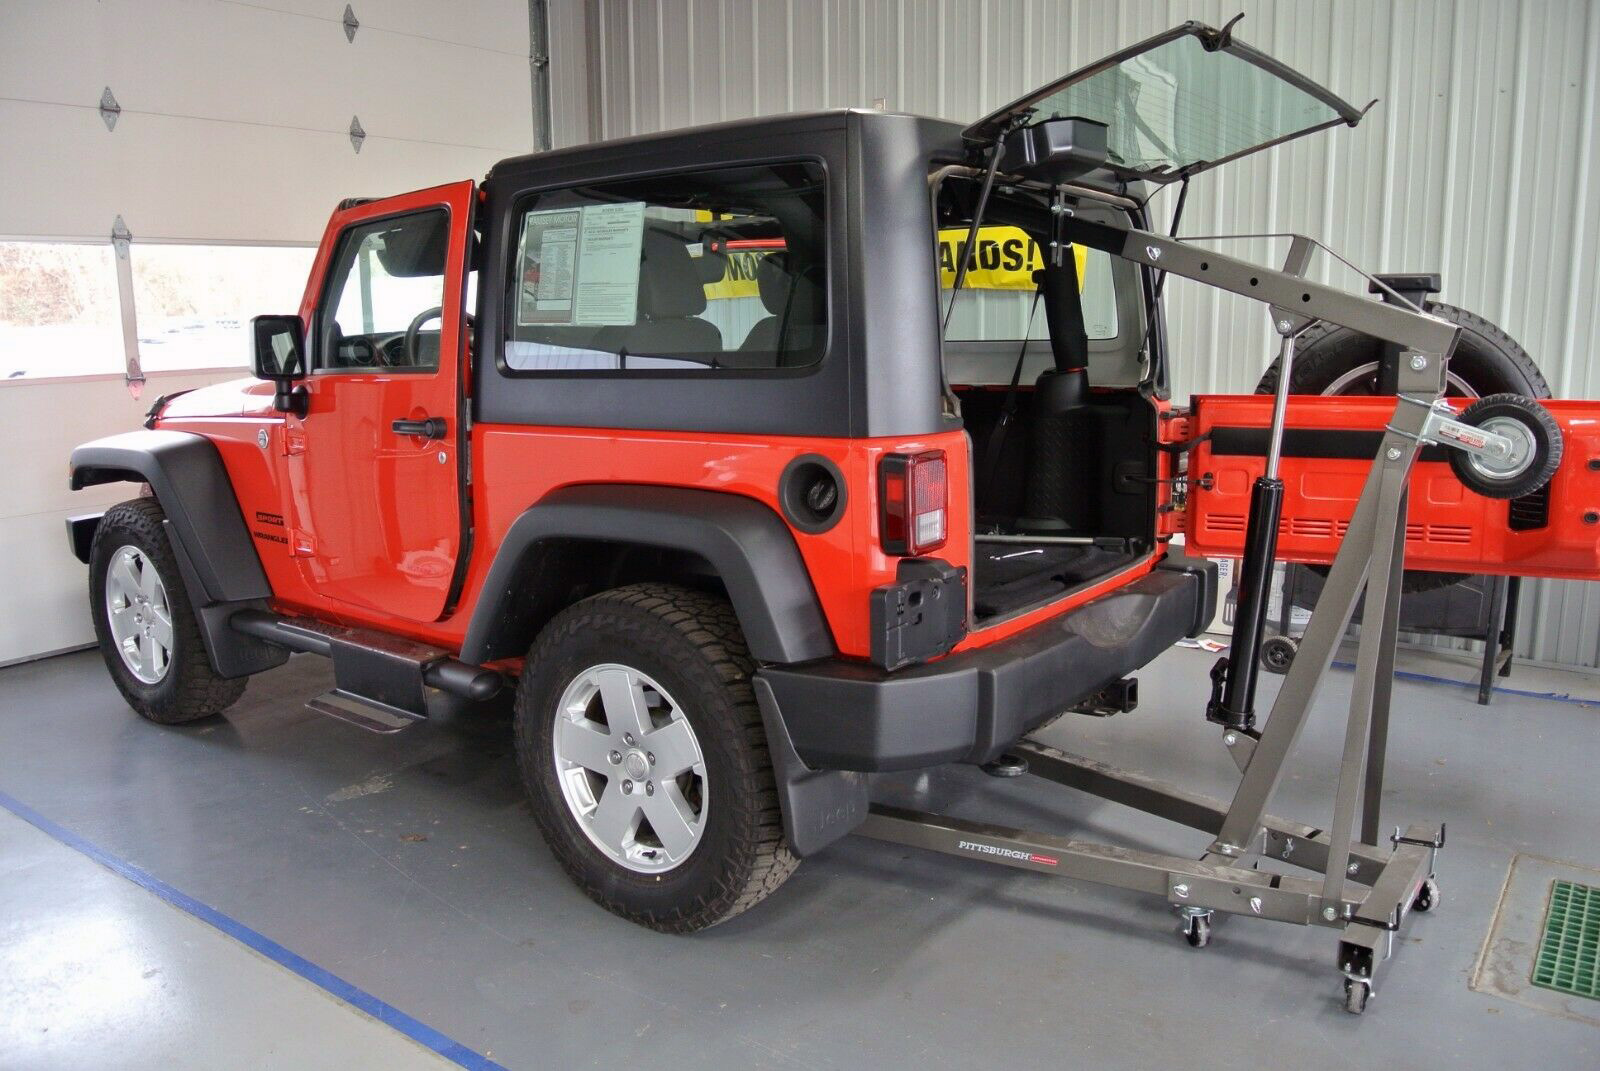 Jeep Lifts and Hoists: Removing and Storing Hardtops - eBay Motors Blog